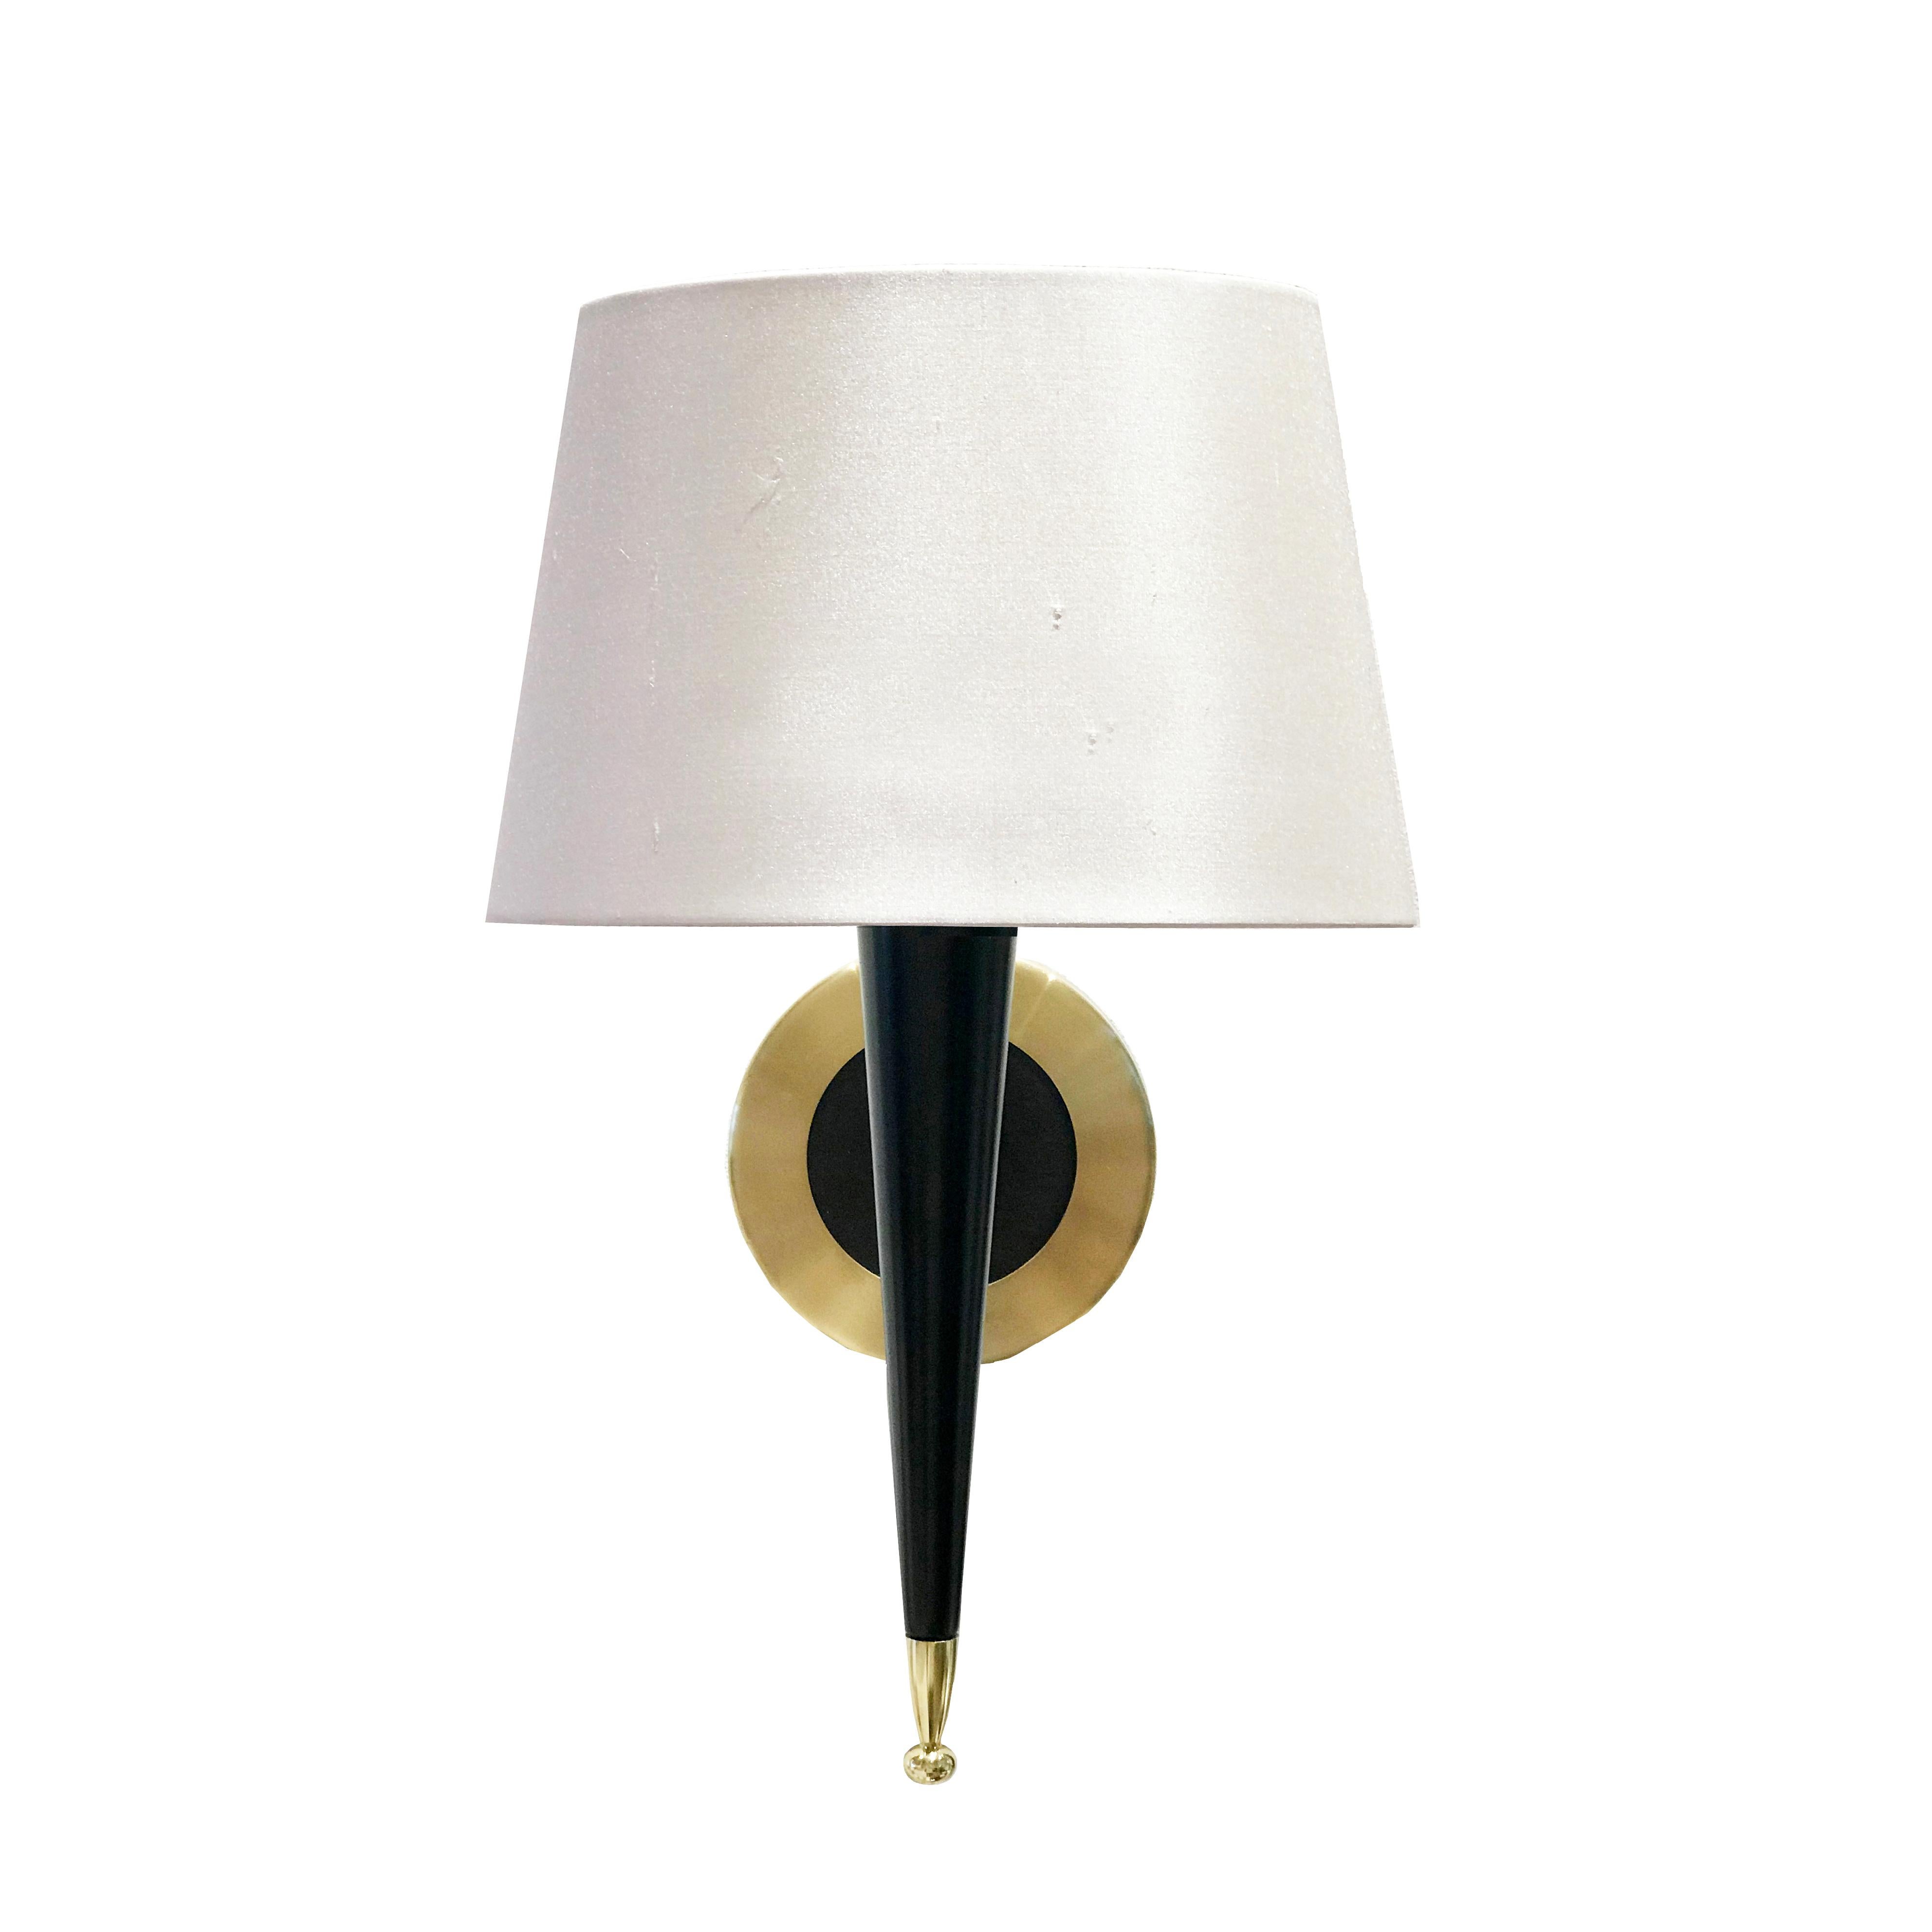 Ebonised wood and satin lacquered wall light with brass finish base. Lampshade is not included.

W13.5 x D15 x H30 cm

Currently in stock, 6 – 8 weeks lead time for large orders